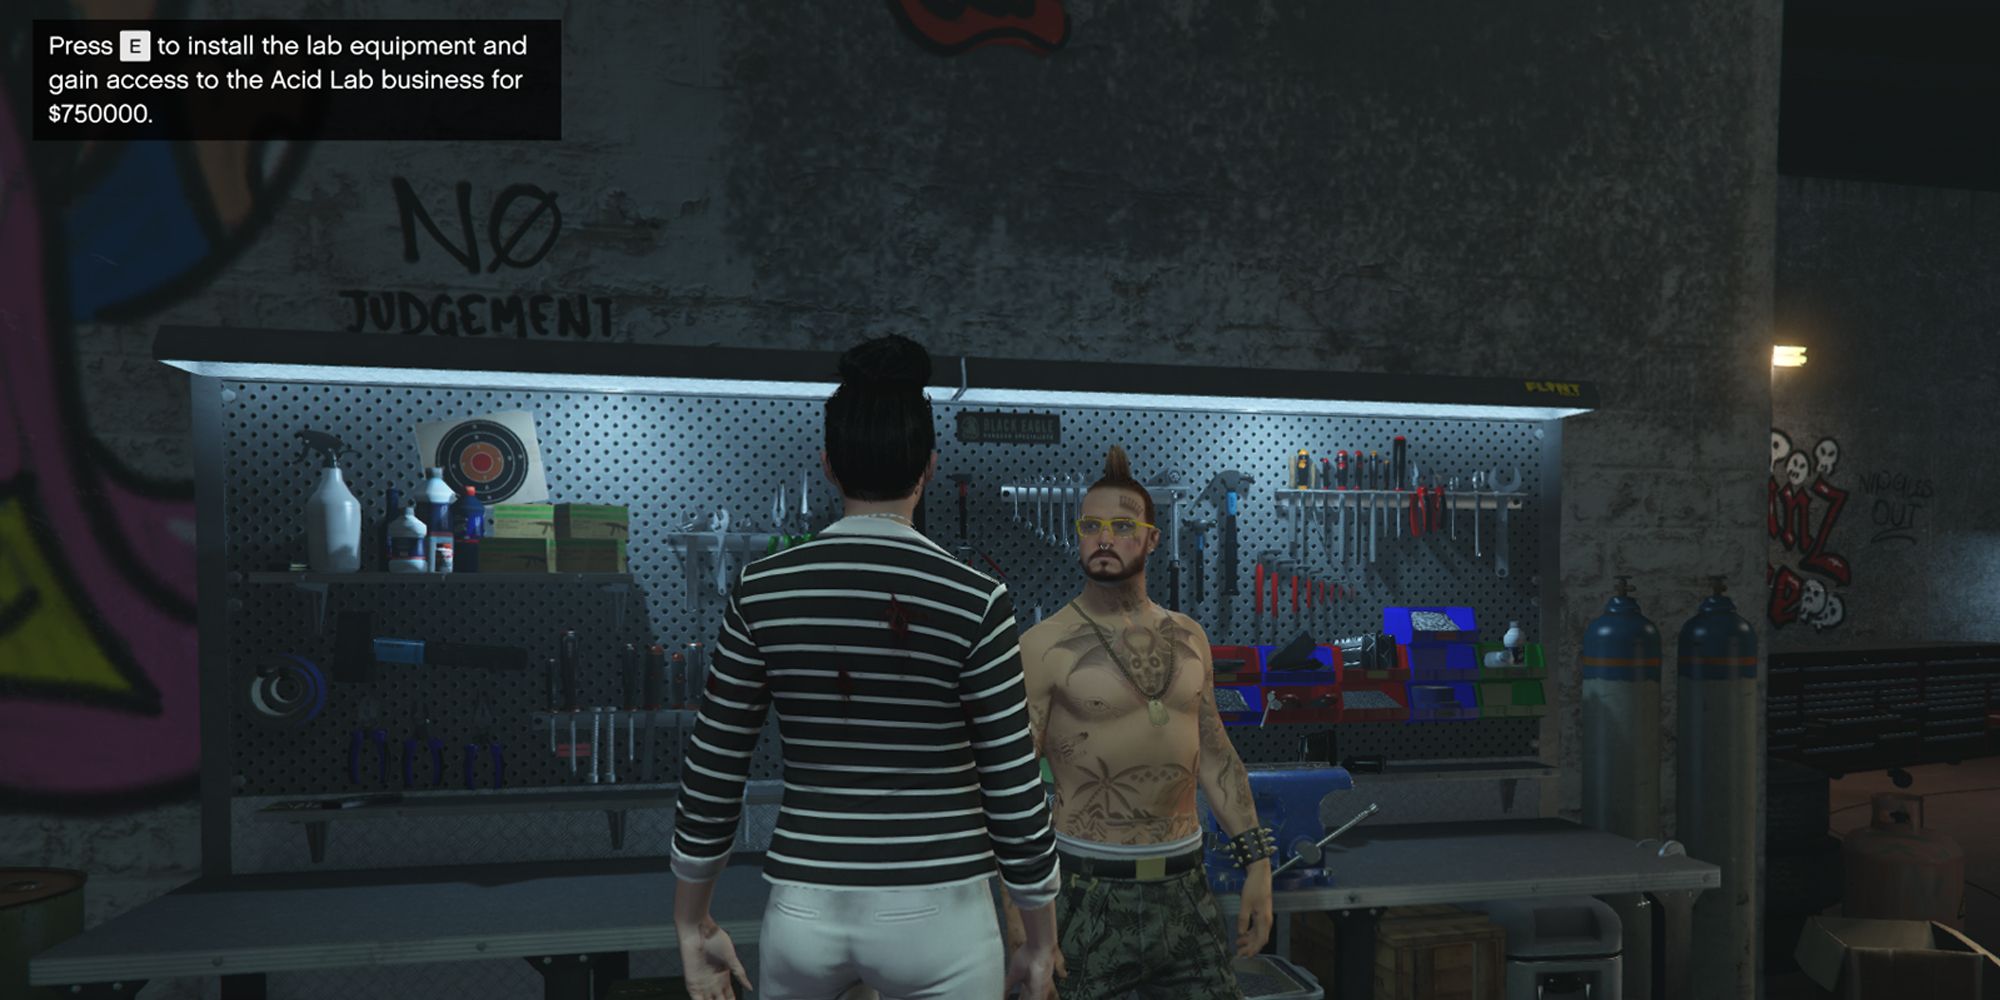 The image shows a Grand Theft Auto Online player standing next to Mutt in the Freakshop in the workbench area.  The text at the top left reads 